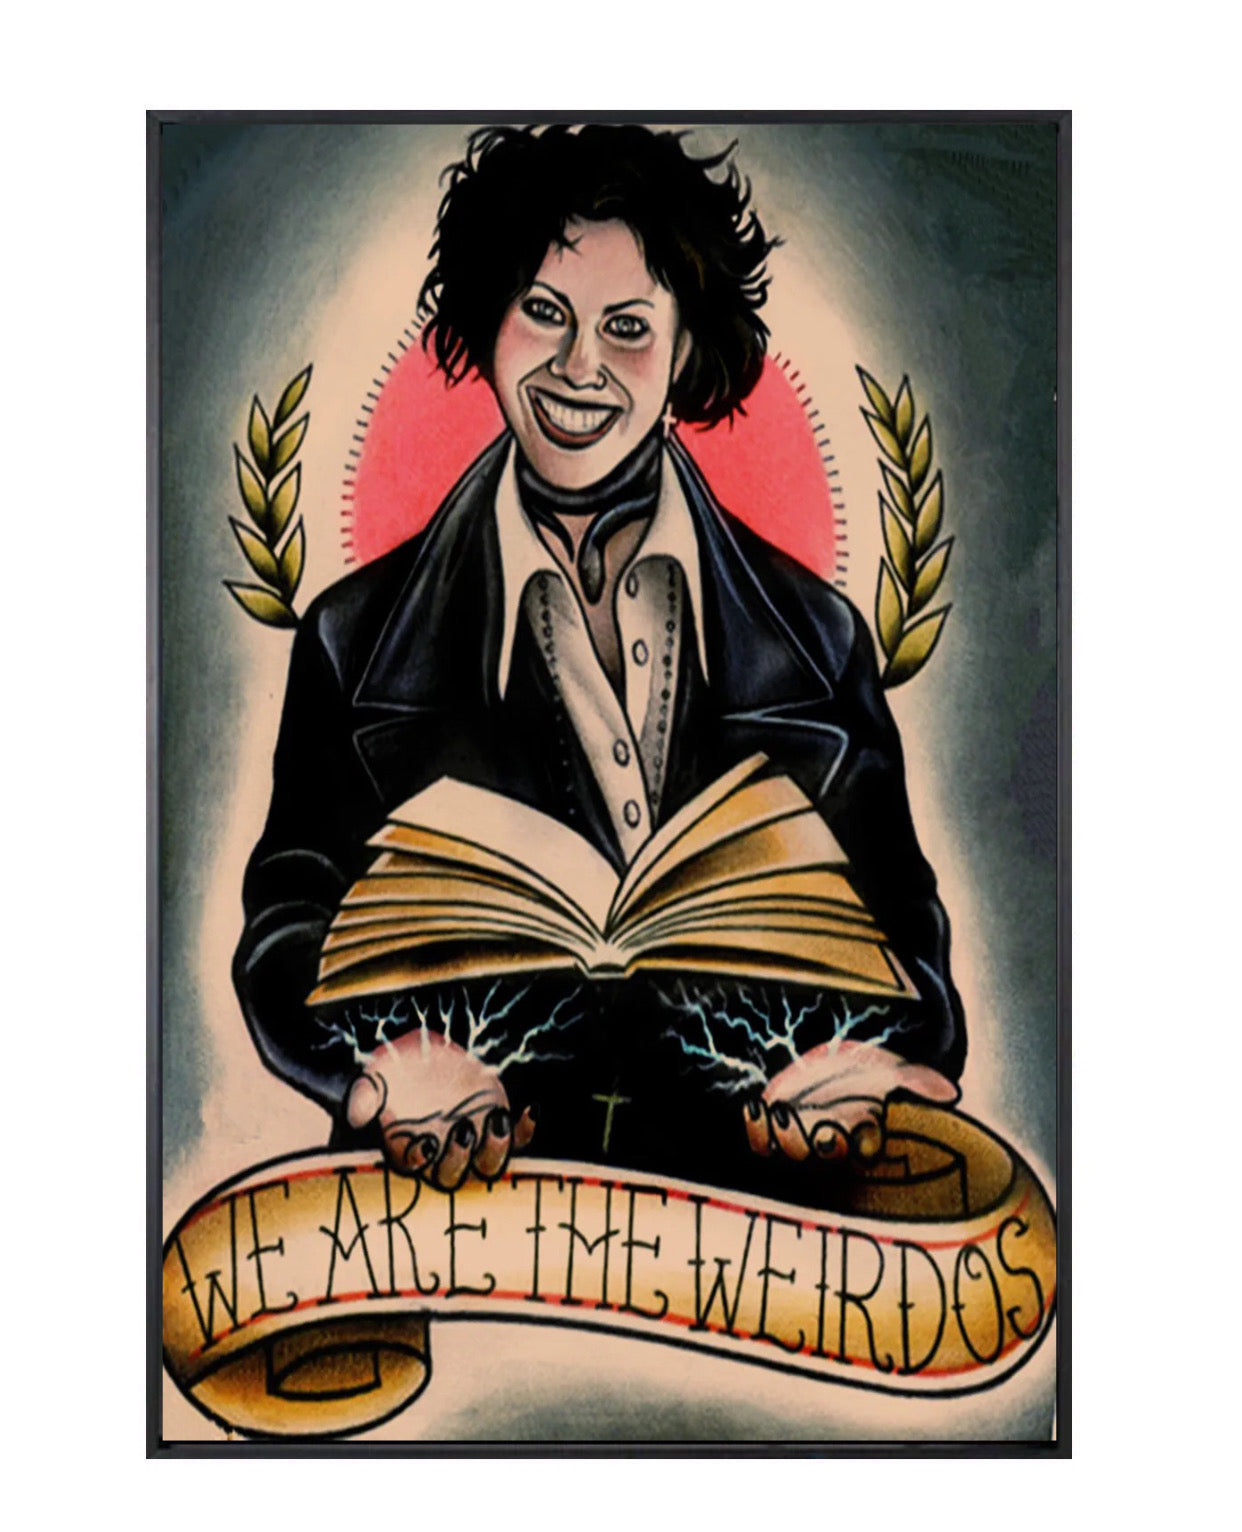 "we are the weirdos" tattoo poster